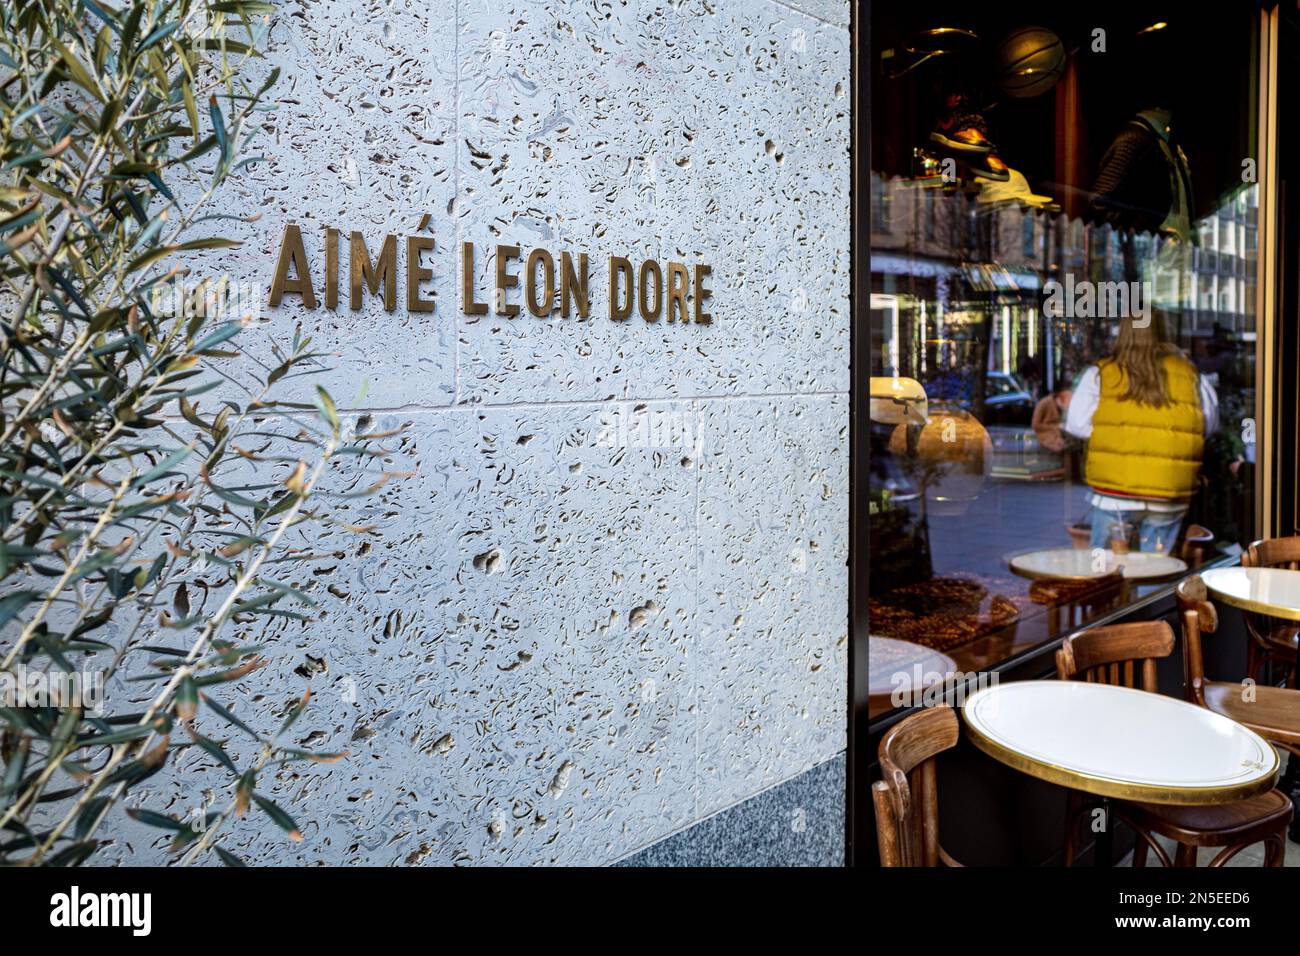 General View of the store Aime Leon Dore on Mulberry Street in Soho, New  York on January 23, 2022. French luxury giant LVMH has taken a minority  stake in the New York-based